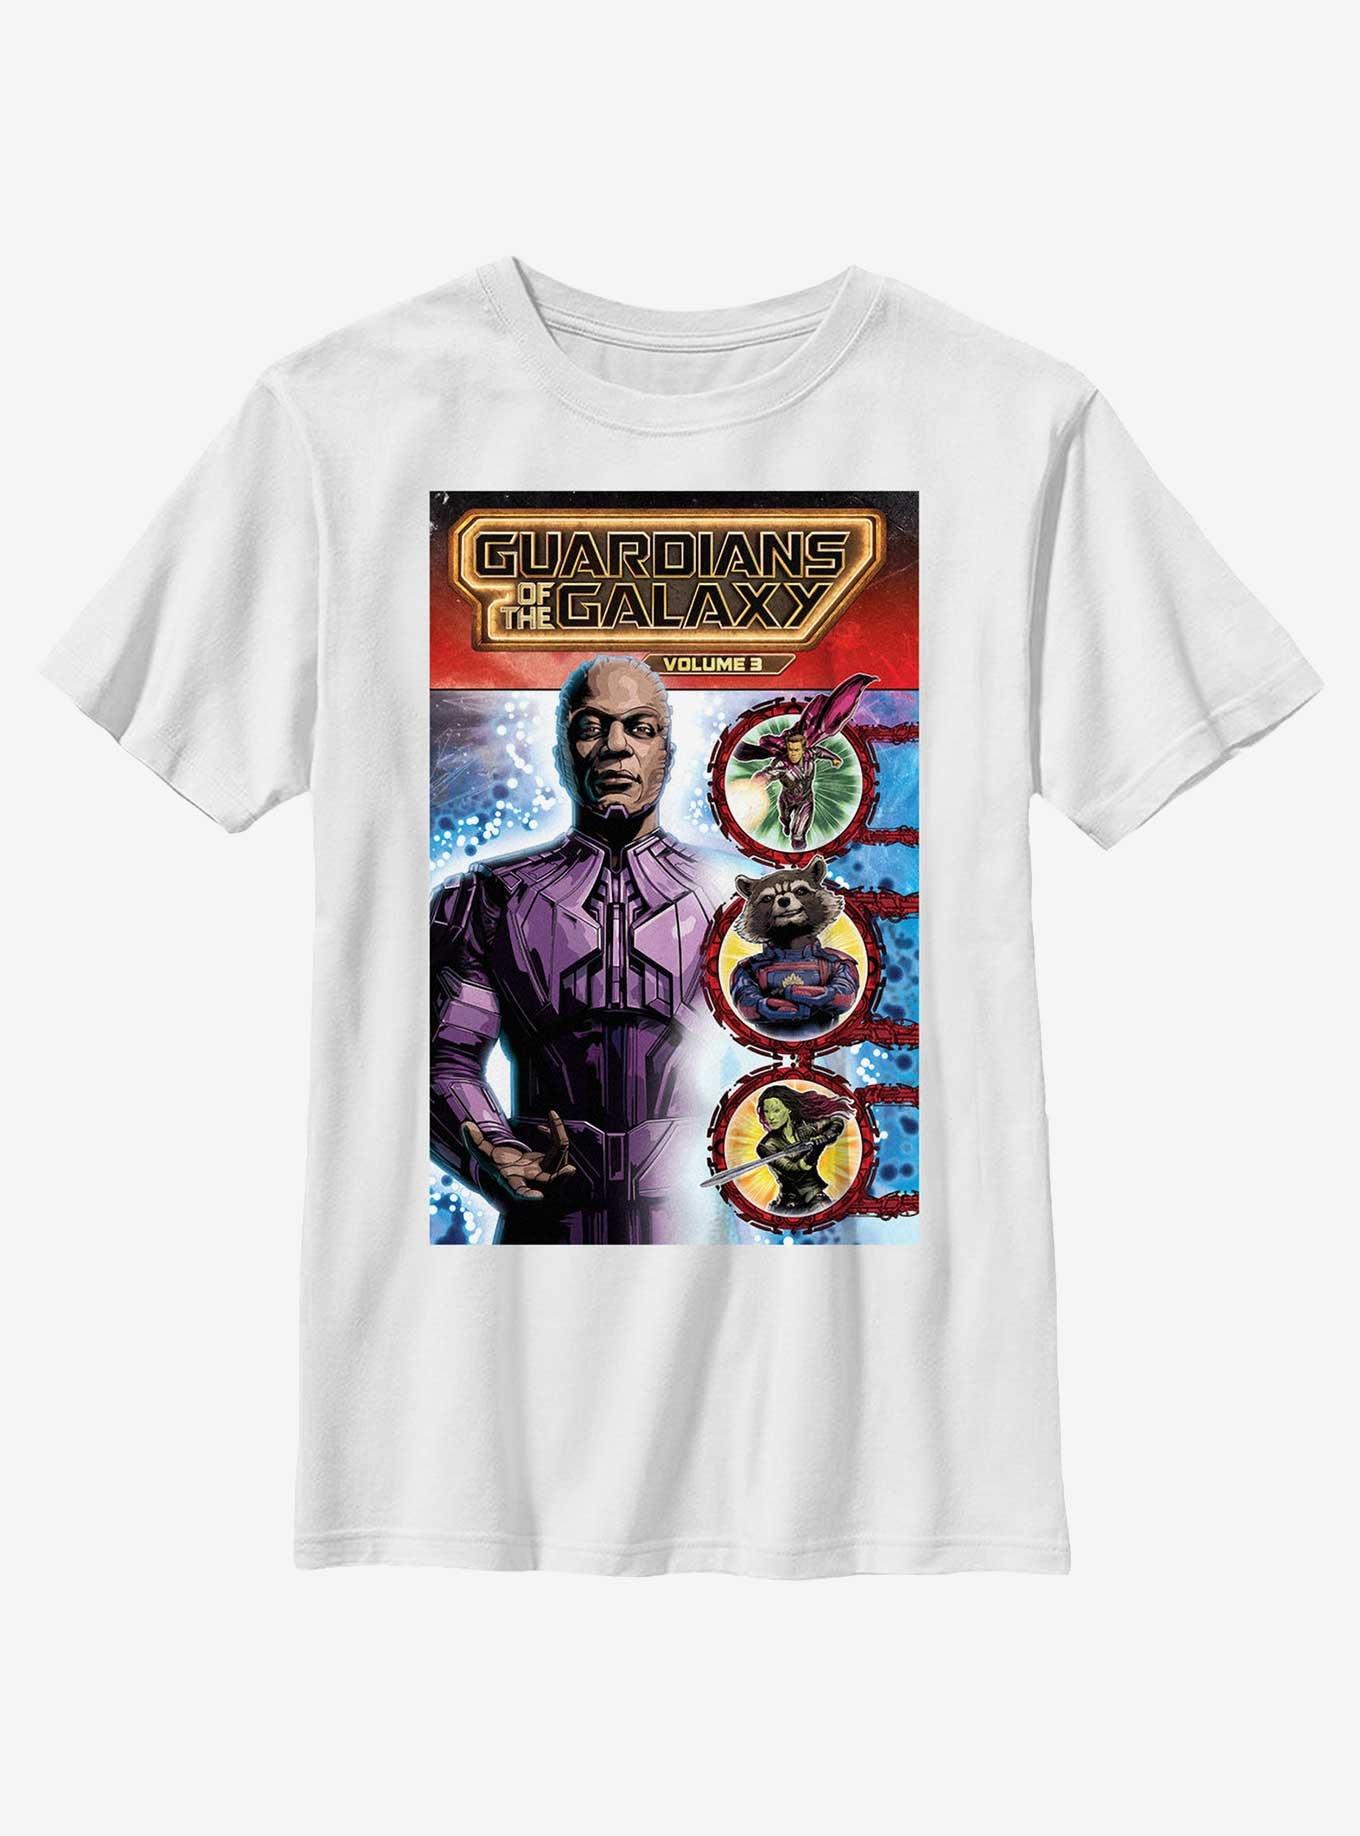 Marvel Guardians of the Galaxy Vol. 3 High Evolutionary Comic Poster Youth T-Shirt, WHITE, hi-res